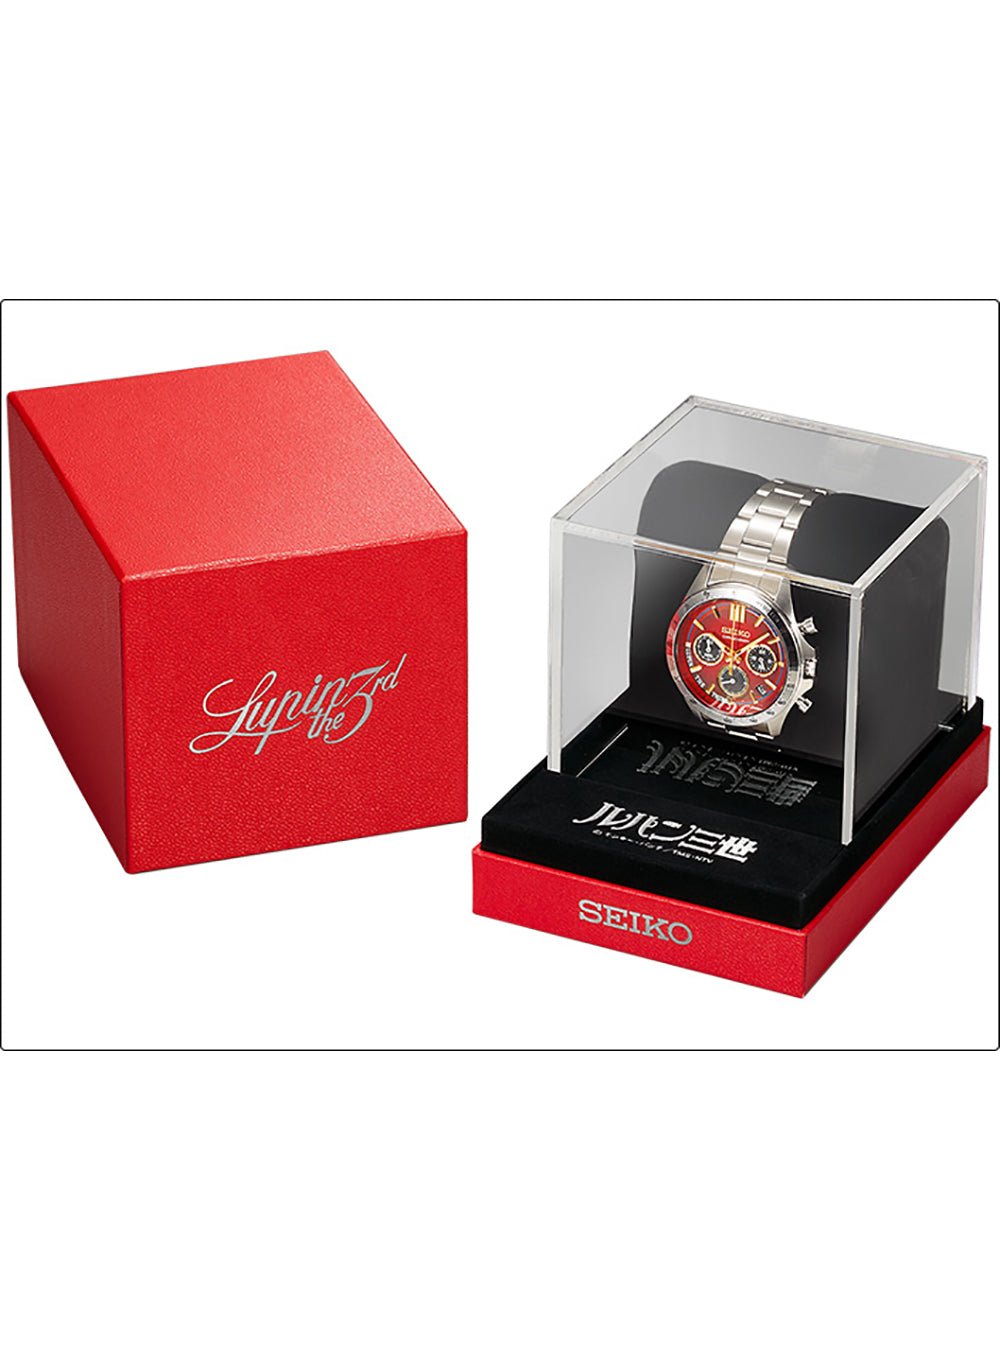 SEIKO x LUPIN THE THIRD COLLABORATION WATCH LIMITED EDITION MADE IN JAPAN